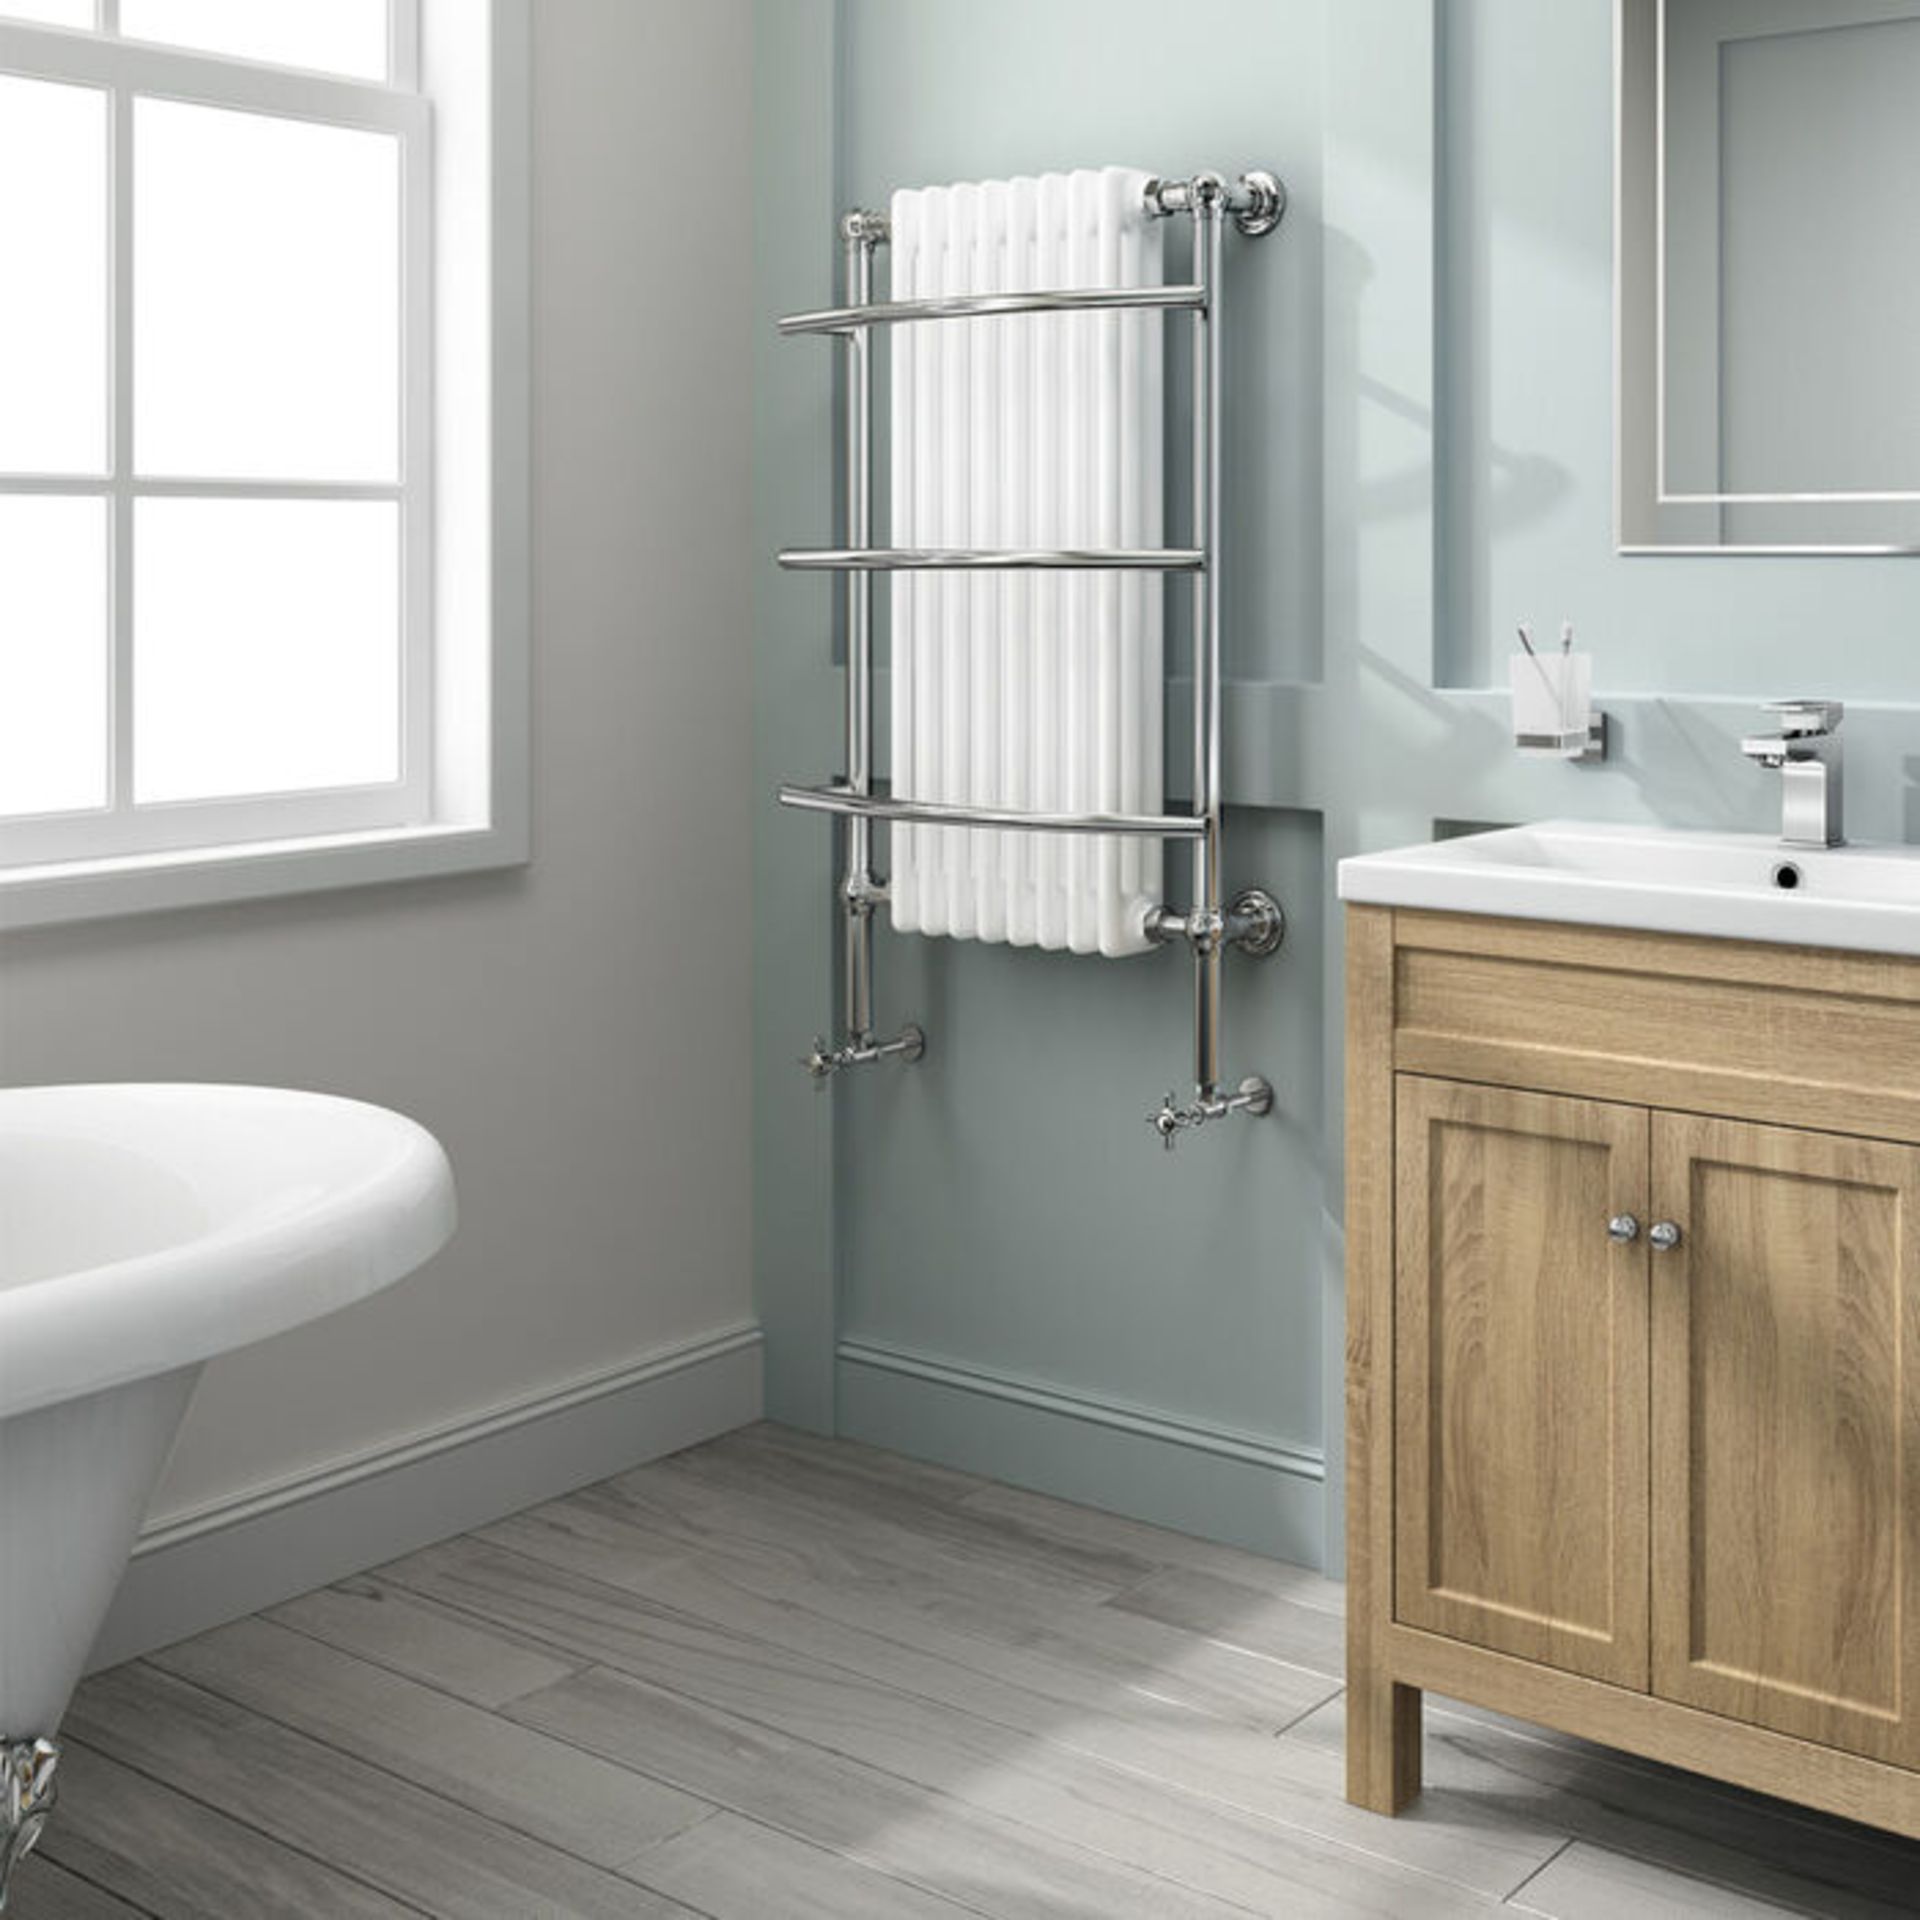 (DD15) 1000x635mm Traditional White Wall Mounted Towel Rail Radiator - Cambridge. RRP £479.99.... - Image 2 of 3